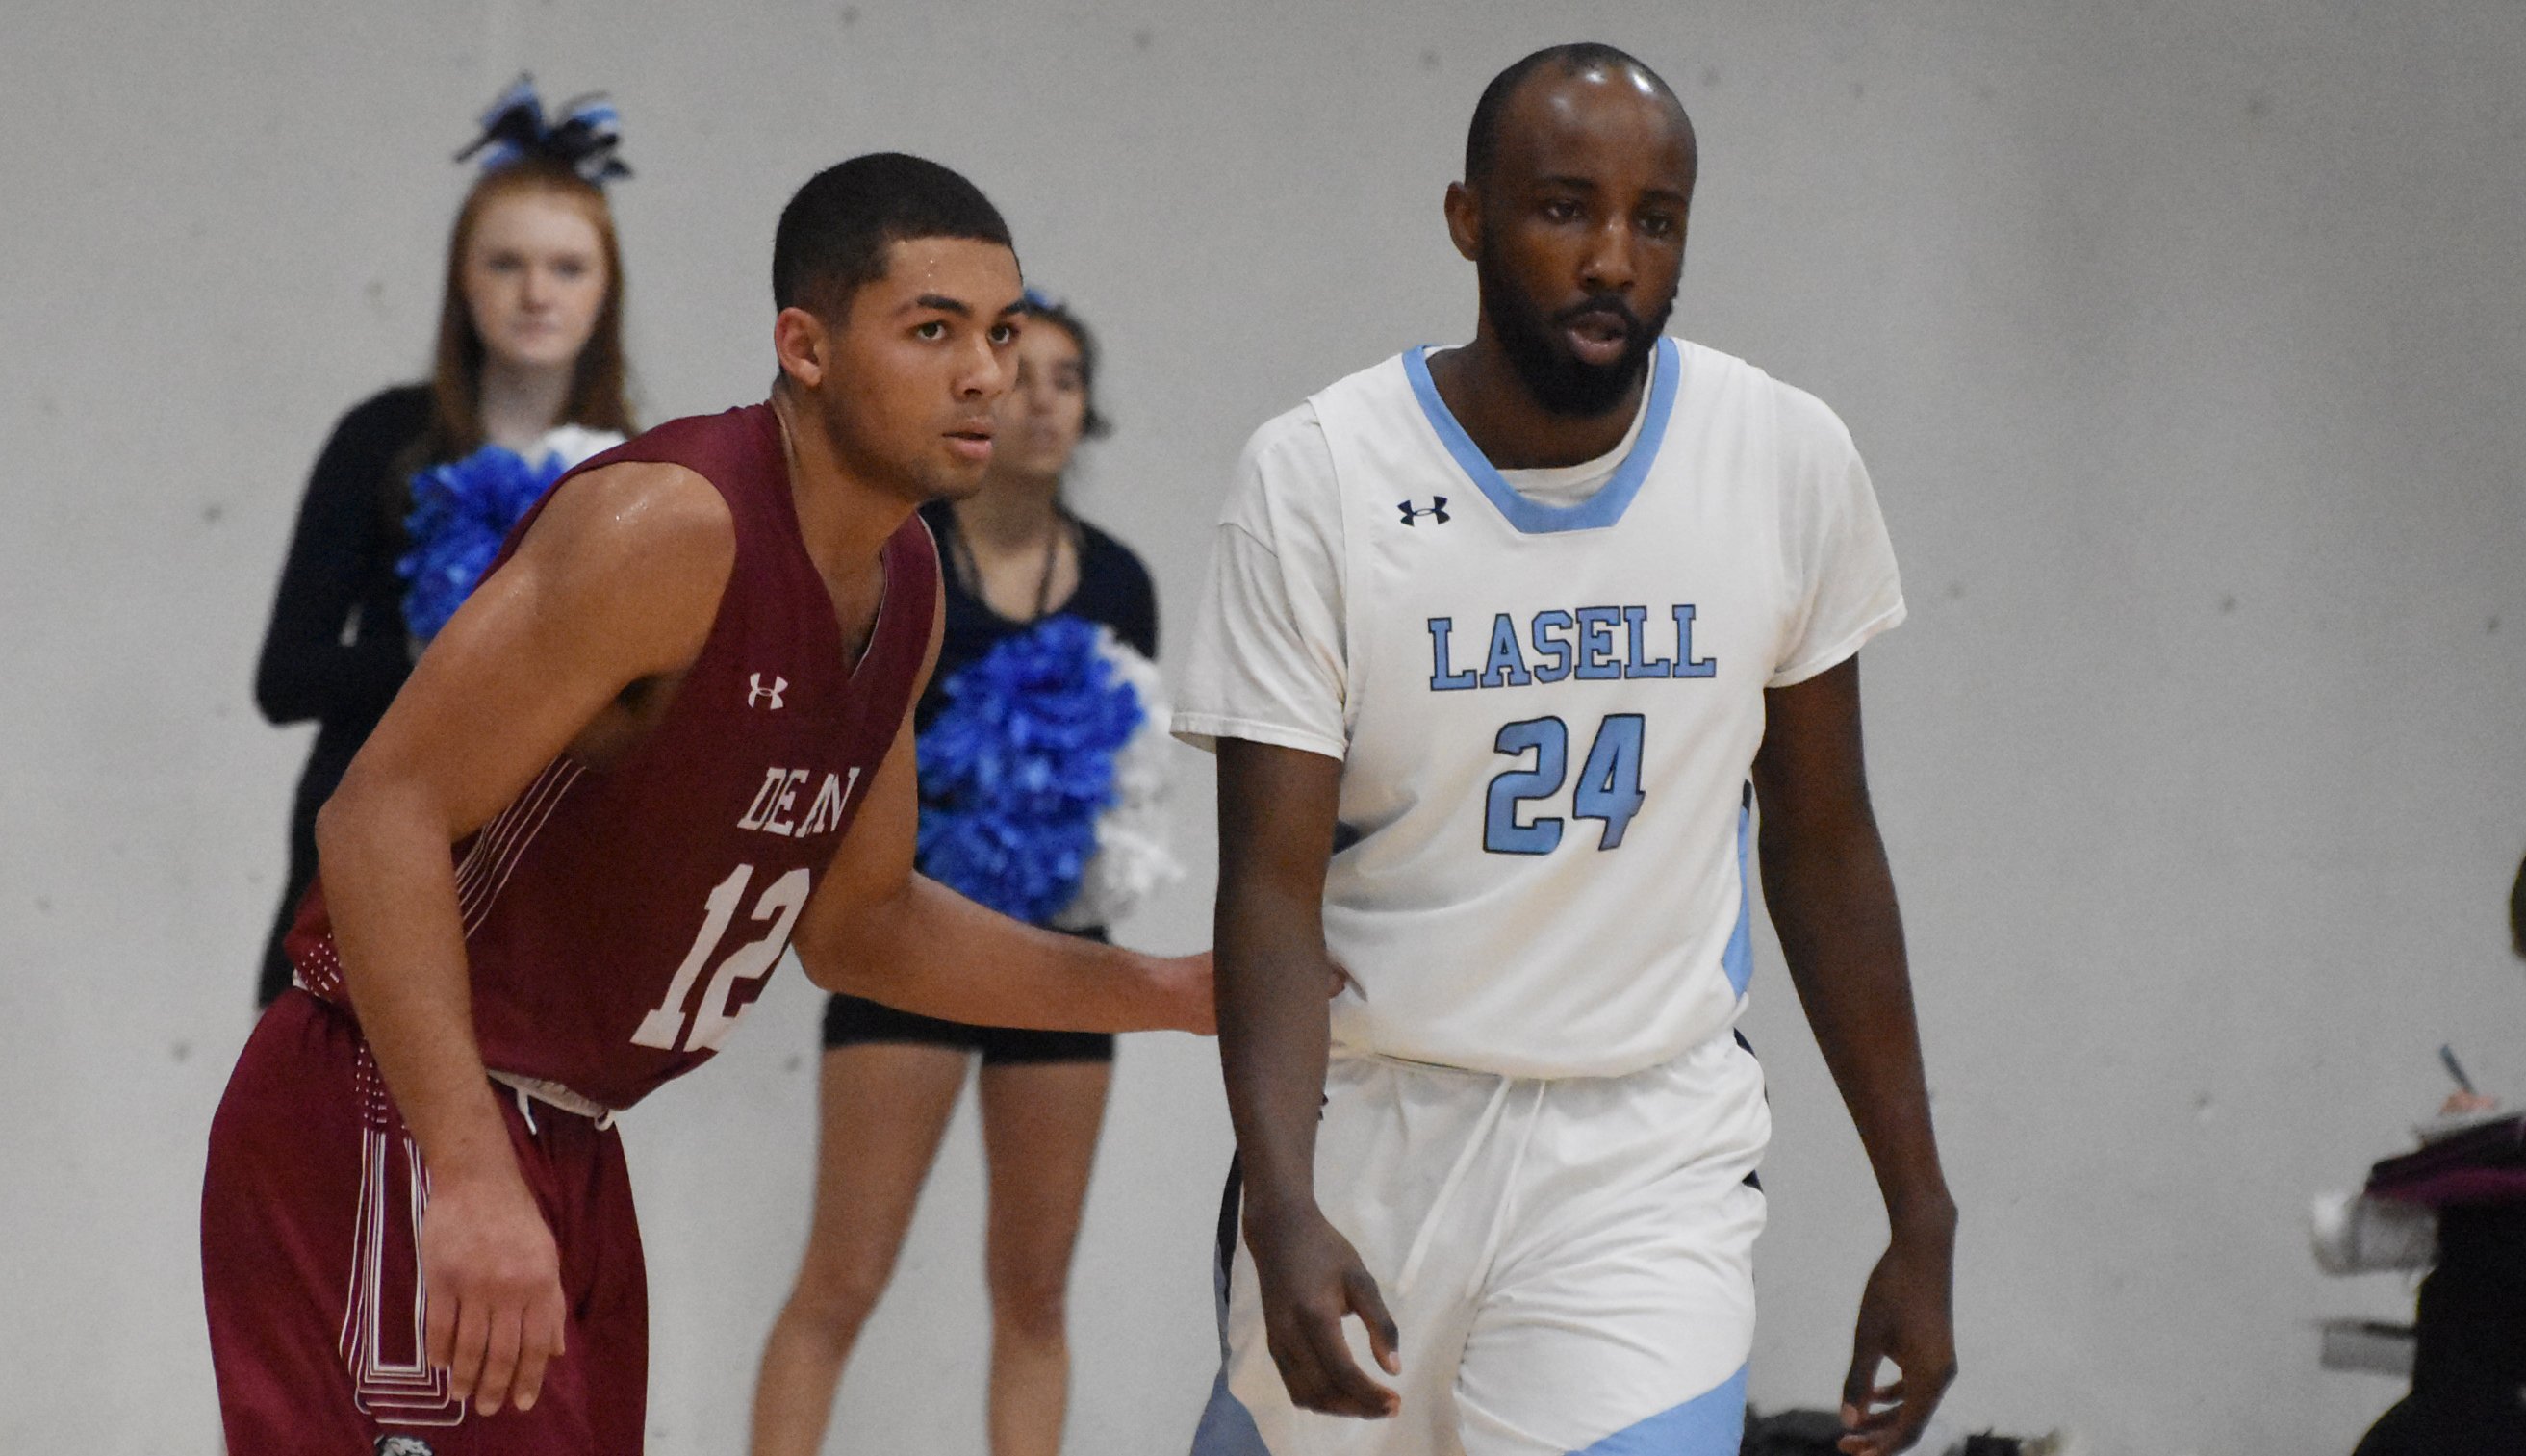 MBK: Starters lead the way for Lasell in GNAC win over Dean